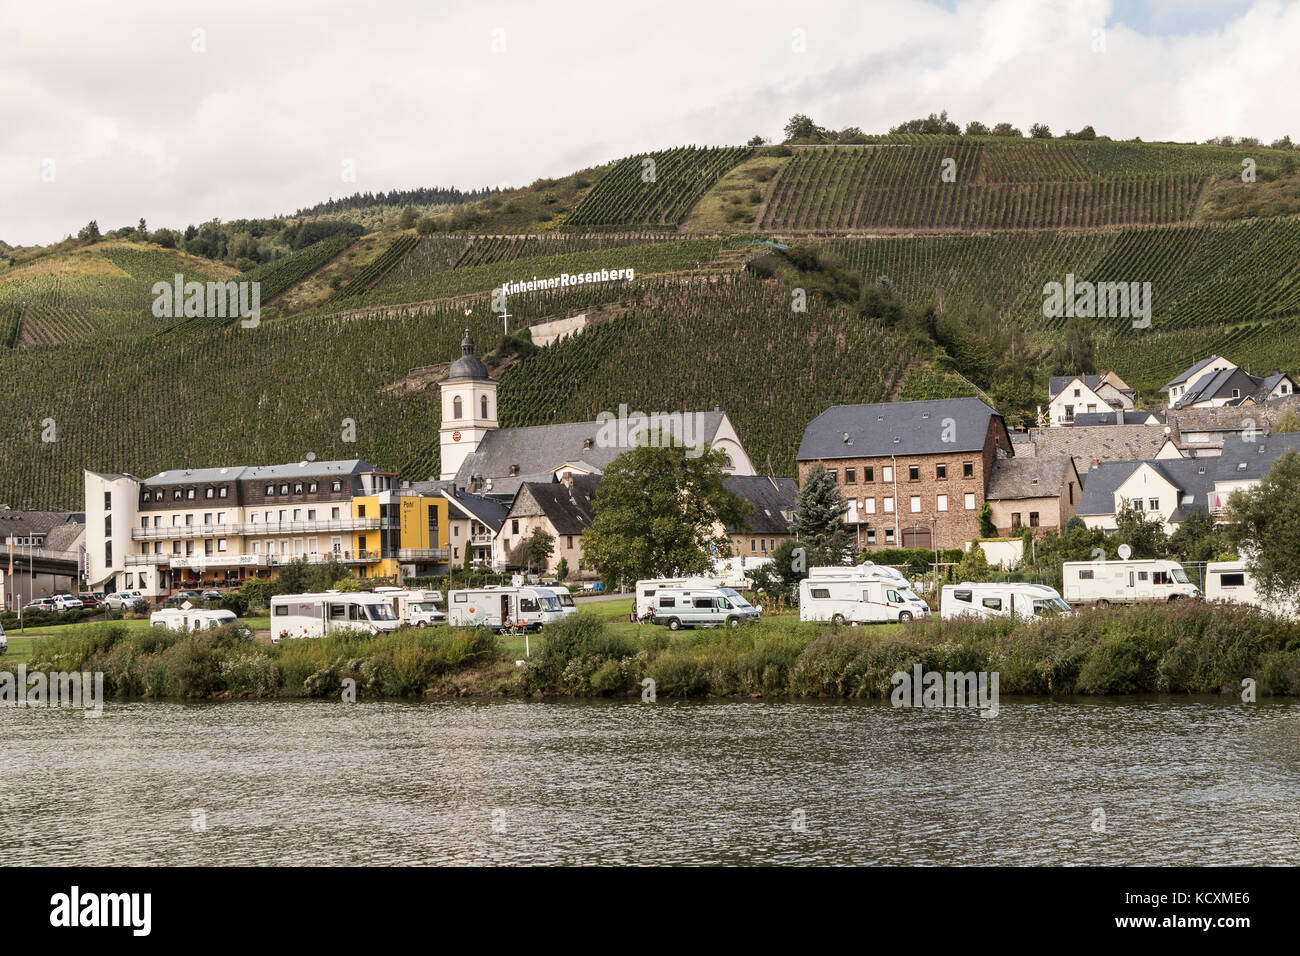 View of the vineyards of Kinheimer Rosenberg from a pleasure boat trip on the Mosel River, Germany Stock Photo